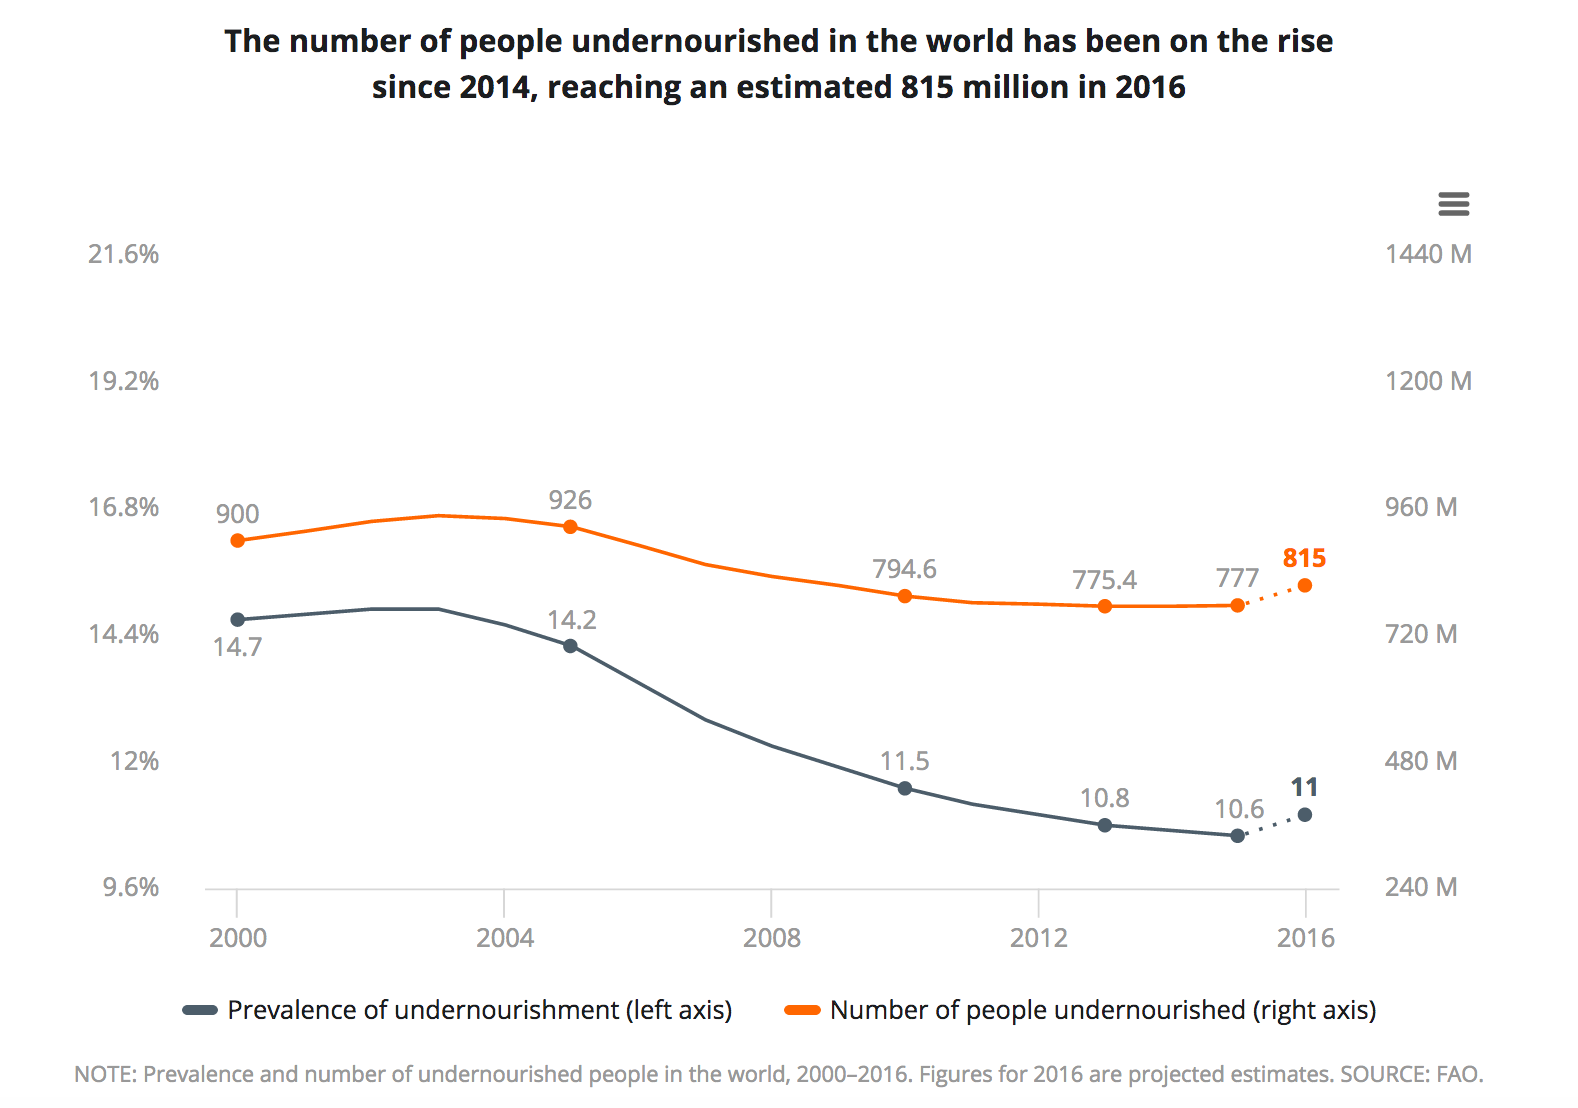 Plot showing the number of people undernourished in the world, which has increased since 2014 and reached an estimated 815 million in 2016